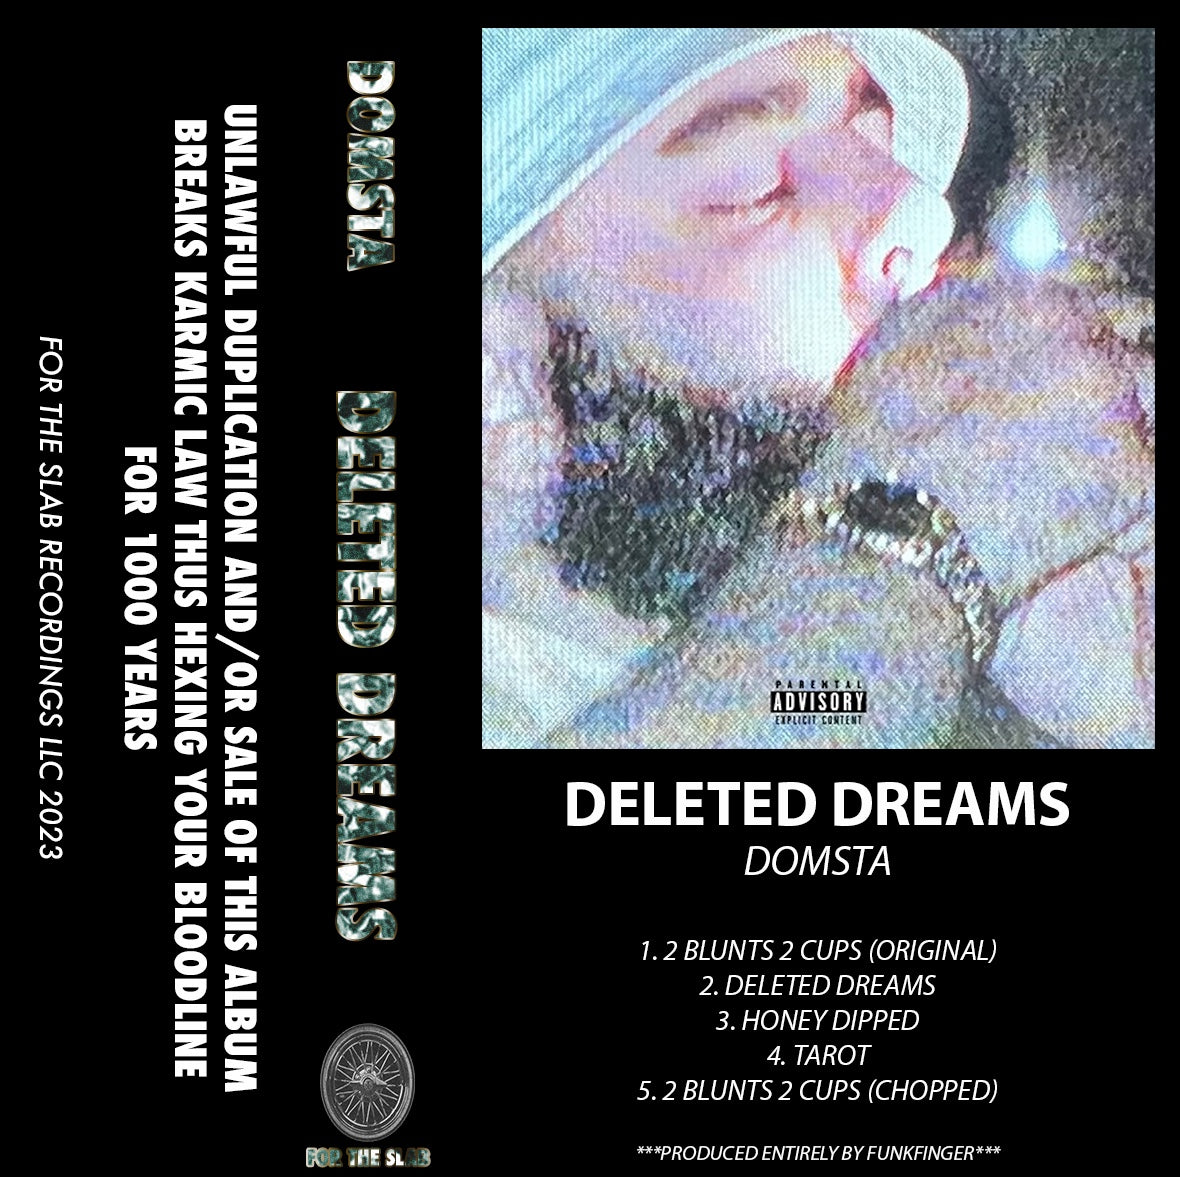 'DELETED DREAMS' PHYSICALS